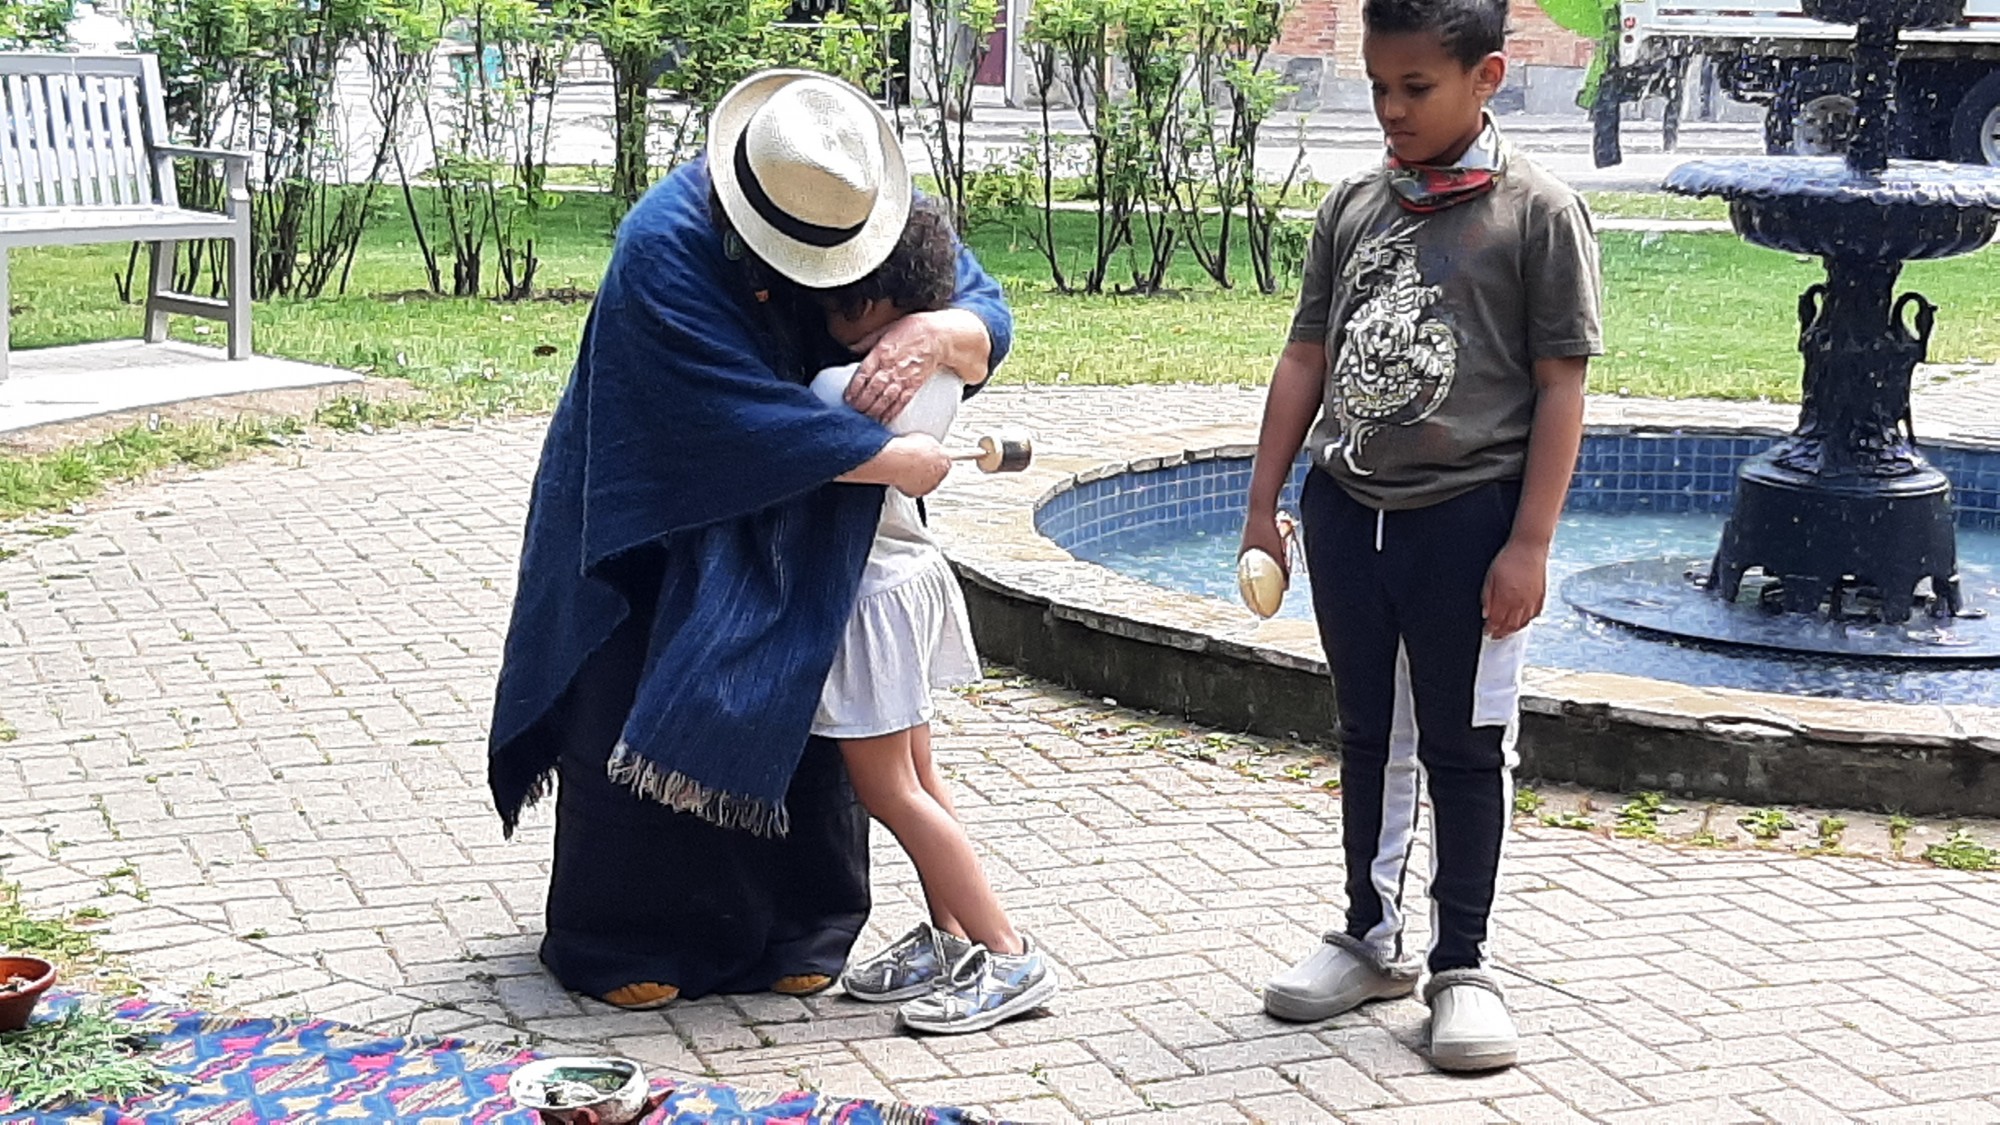 Local Indigenous Elder, Nina De Shane, brought her grandchildren to the Baden, grassroots memorial for children who died in the residential school system. After an intimate ceremony of mourning, the three sang a traditional lullaby